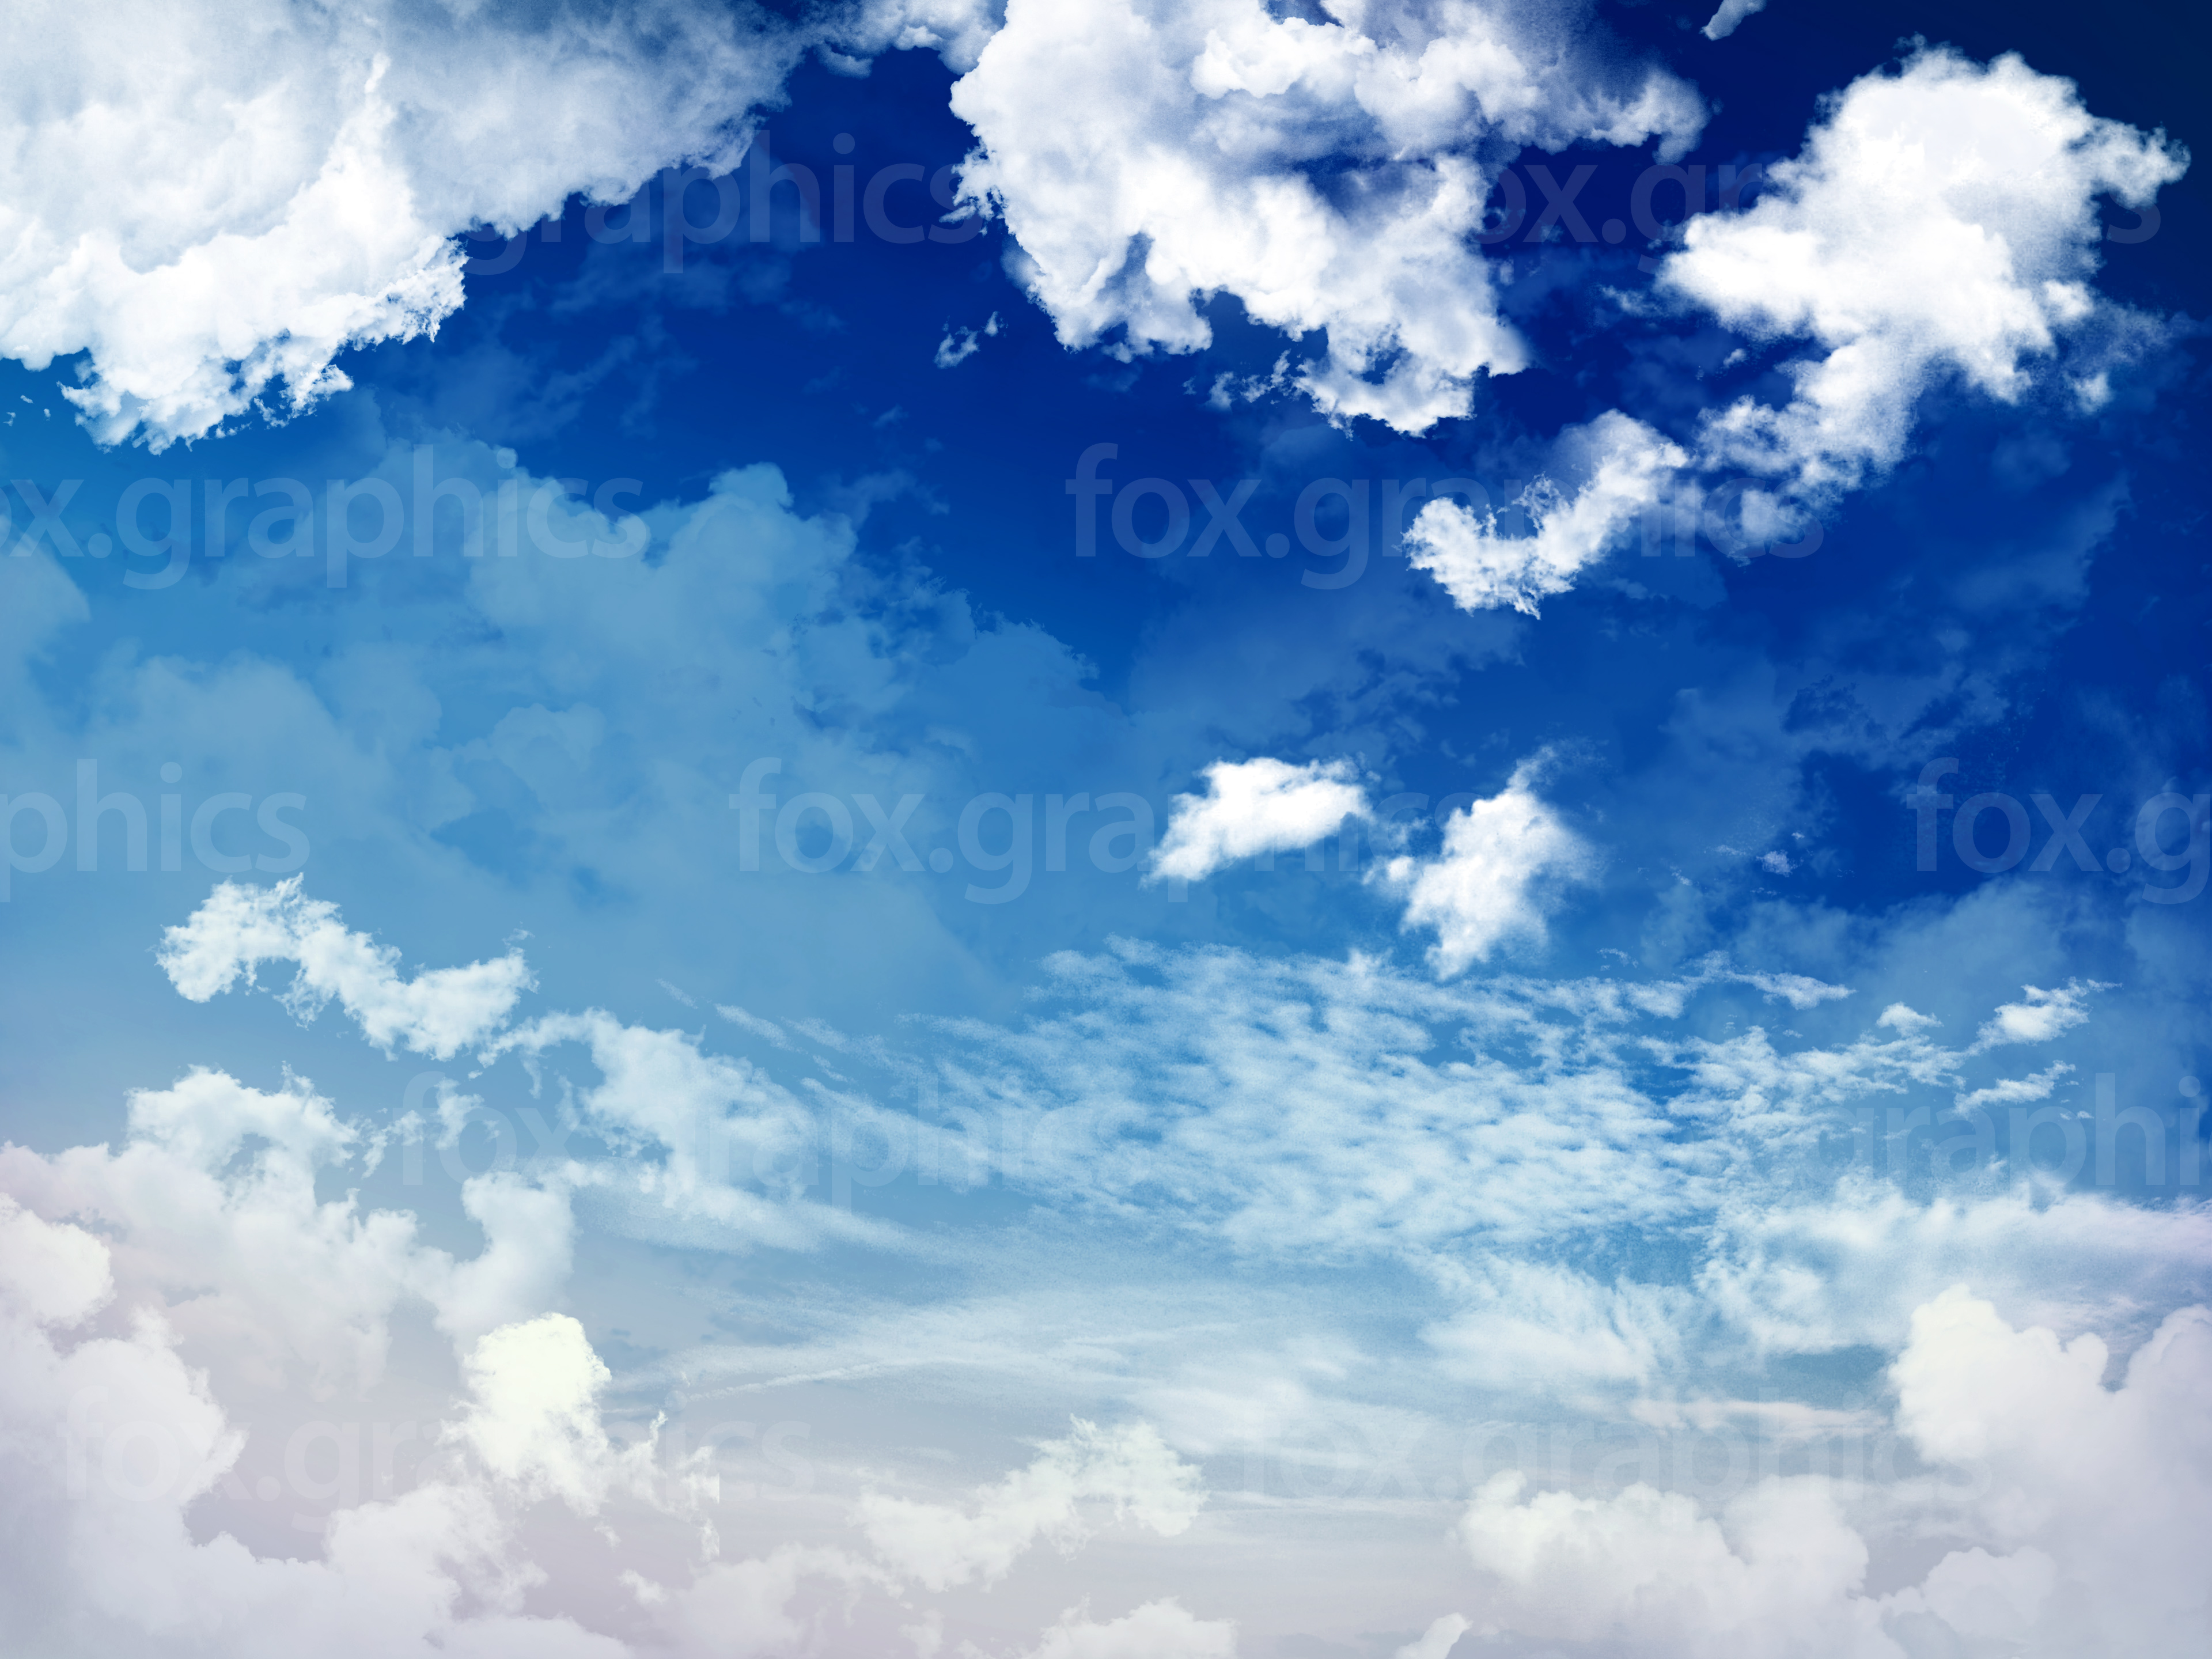 Cloudy Sky Background Fox Graphics